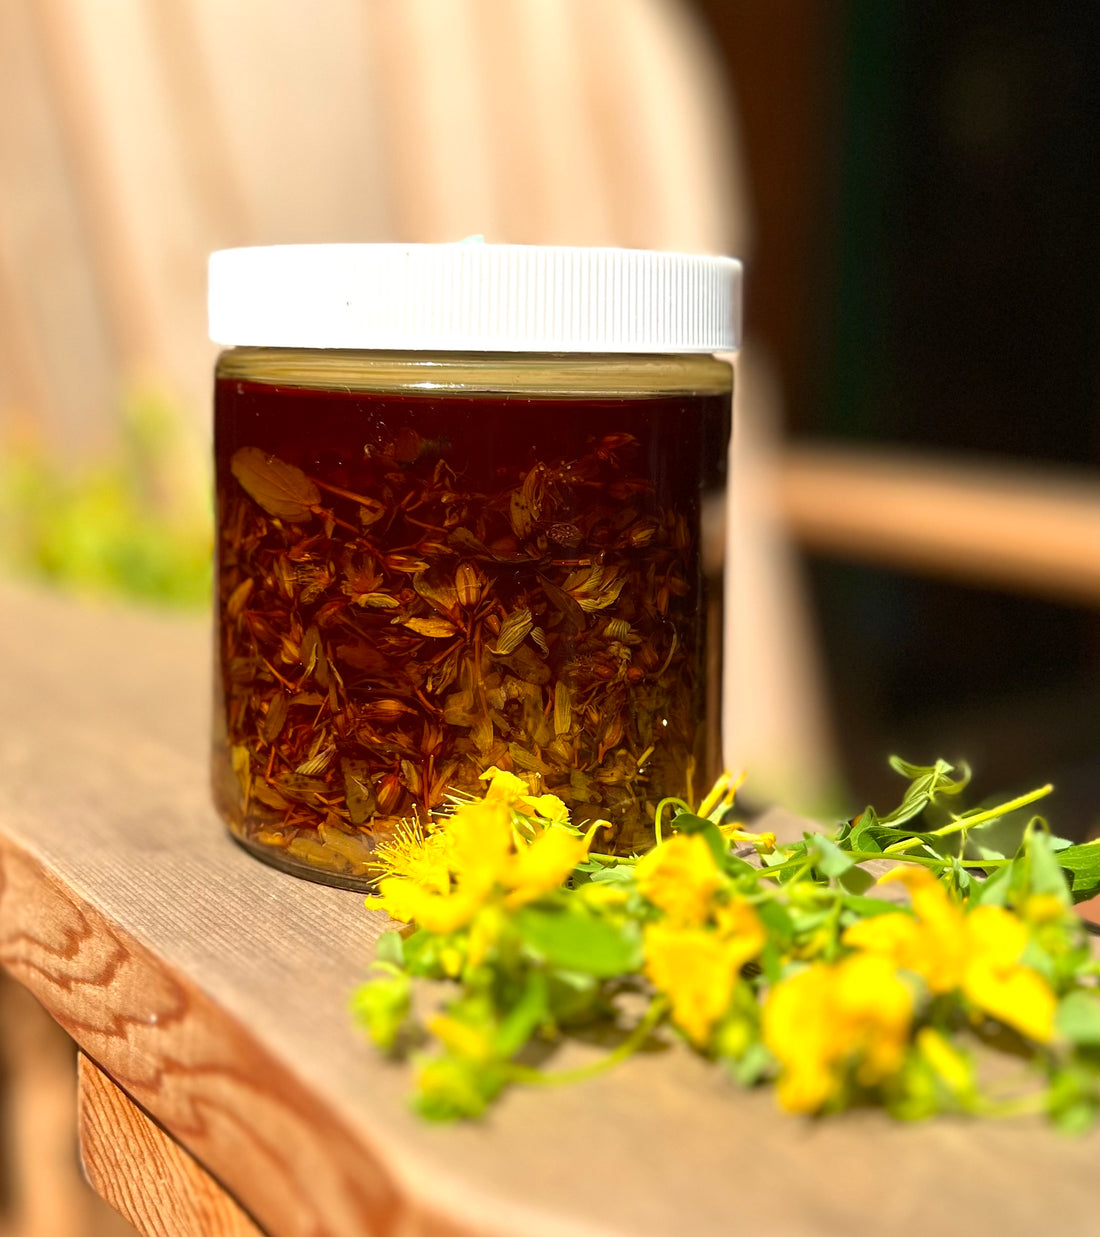 How to Make St. John's Wort Oil and Why You Should